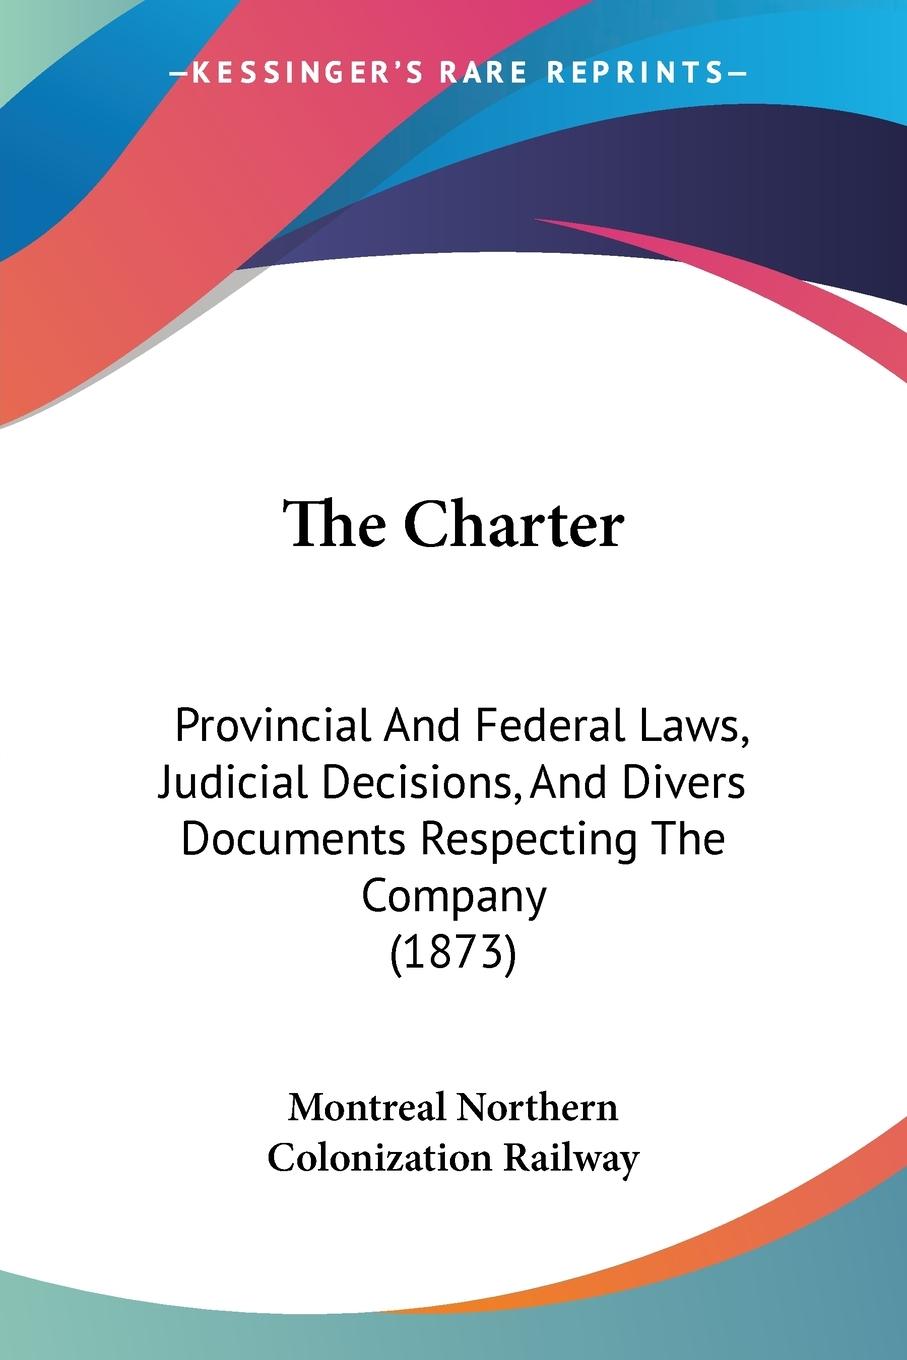 The Charter - Montreal Northern Colonization Railway